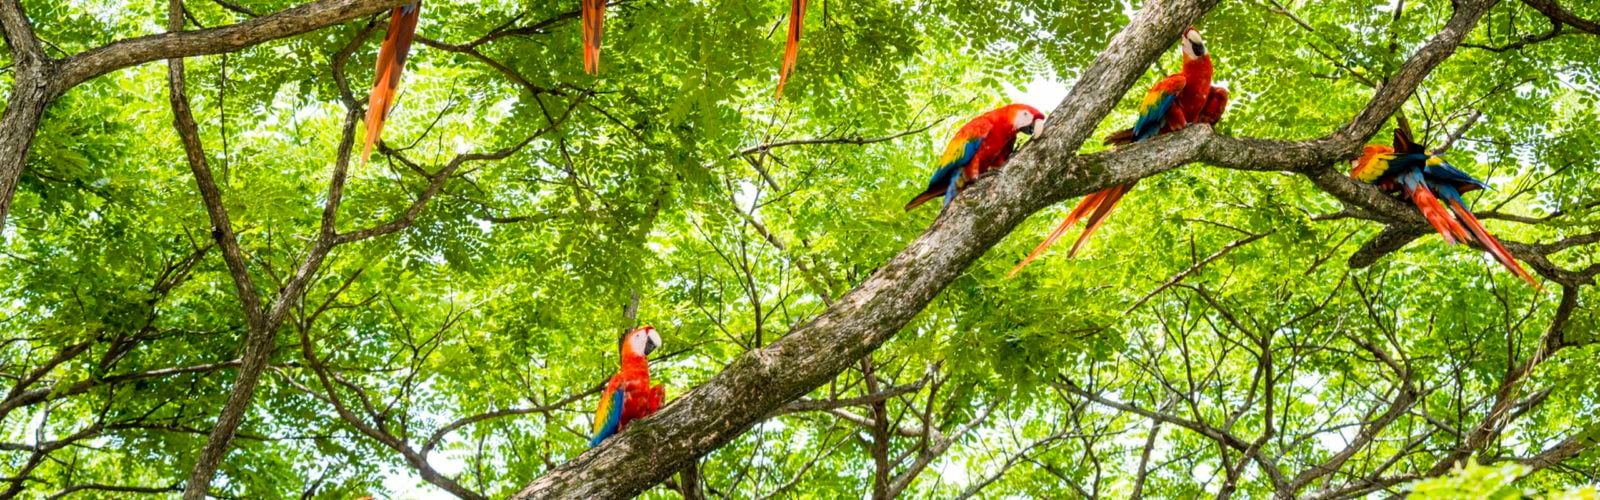 Flock of scarlet macaws Costa Rica